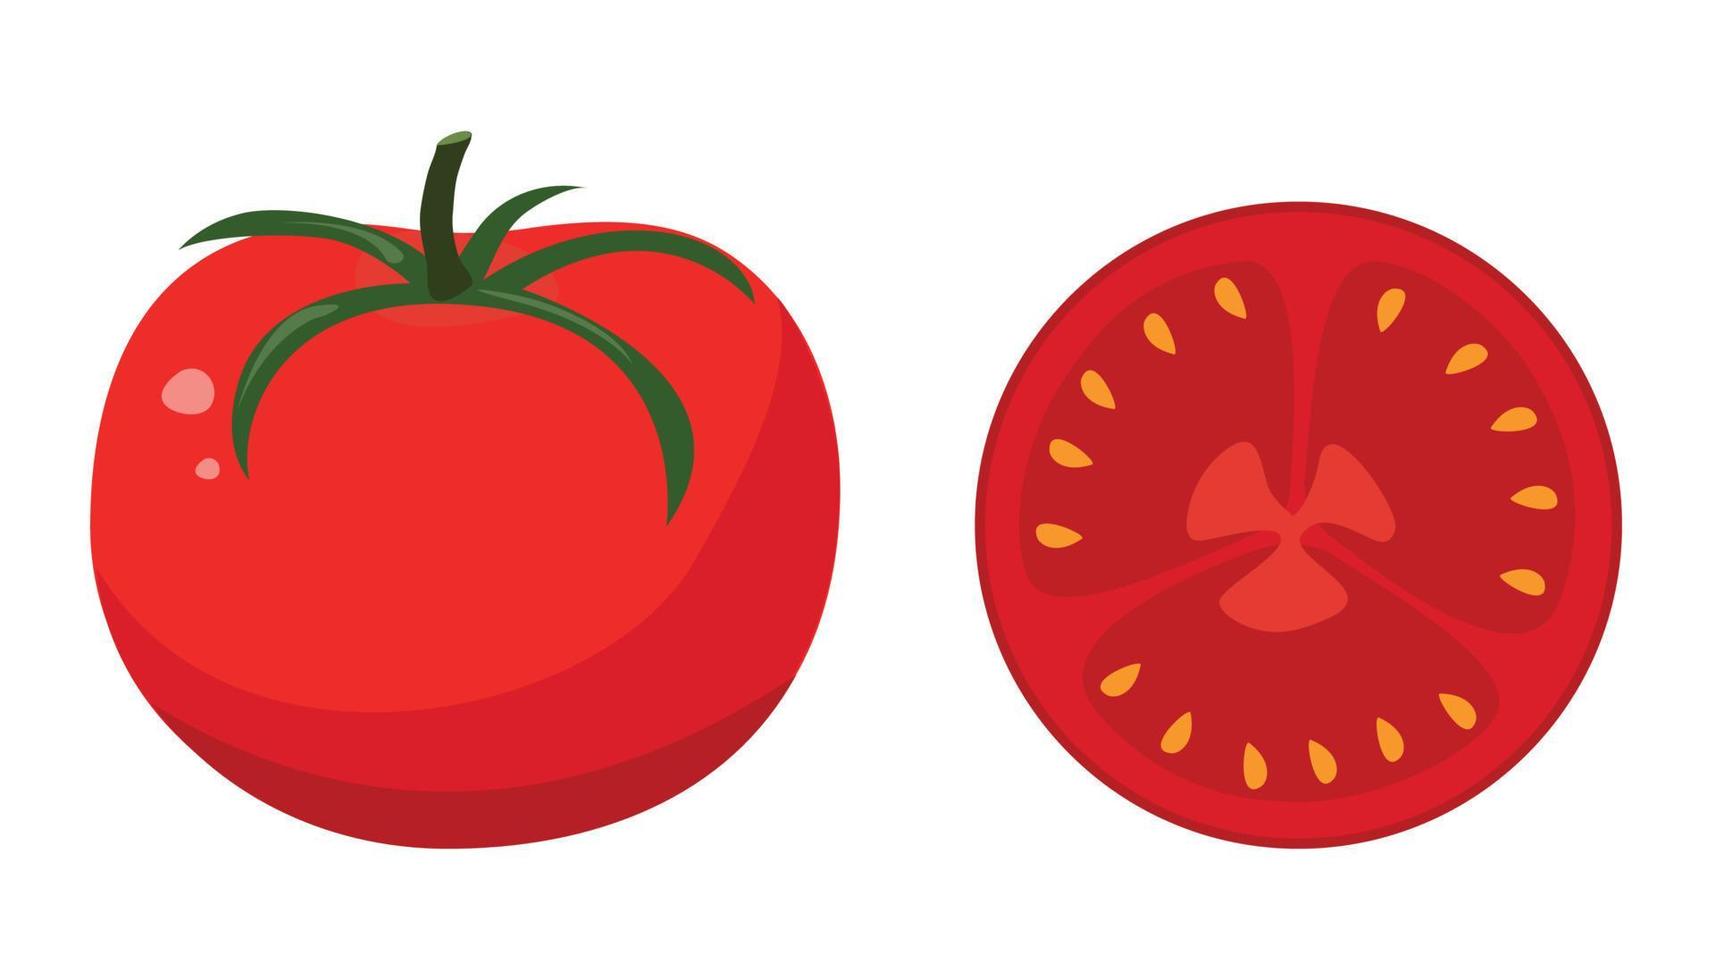 Red tomato in flat style. Vector illustration